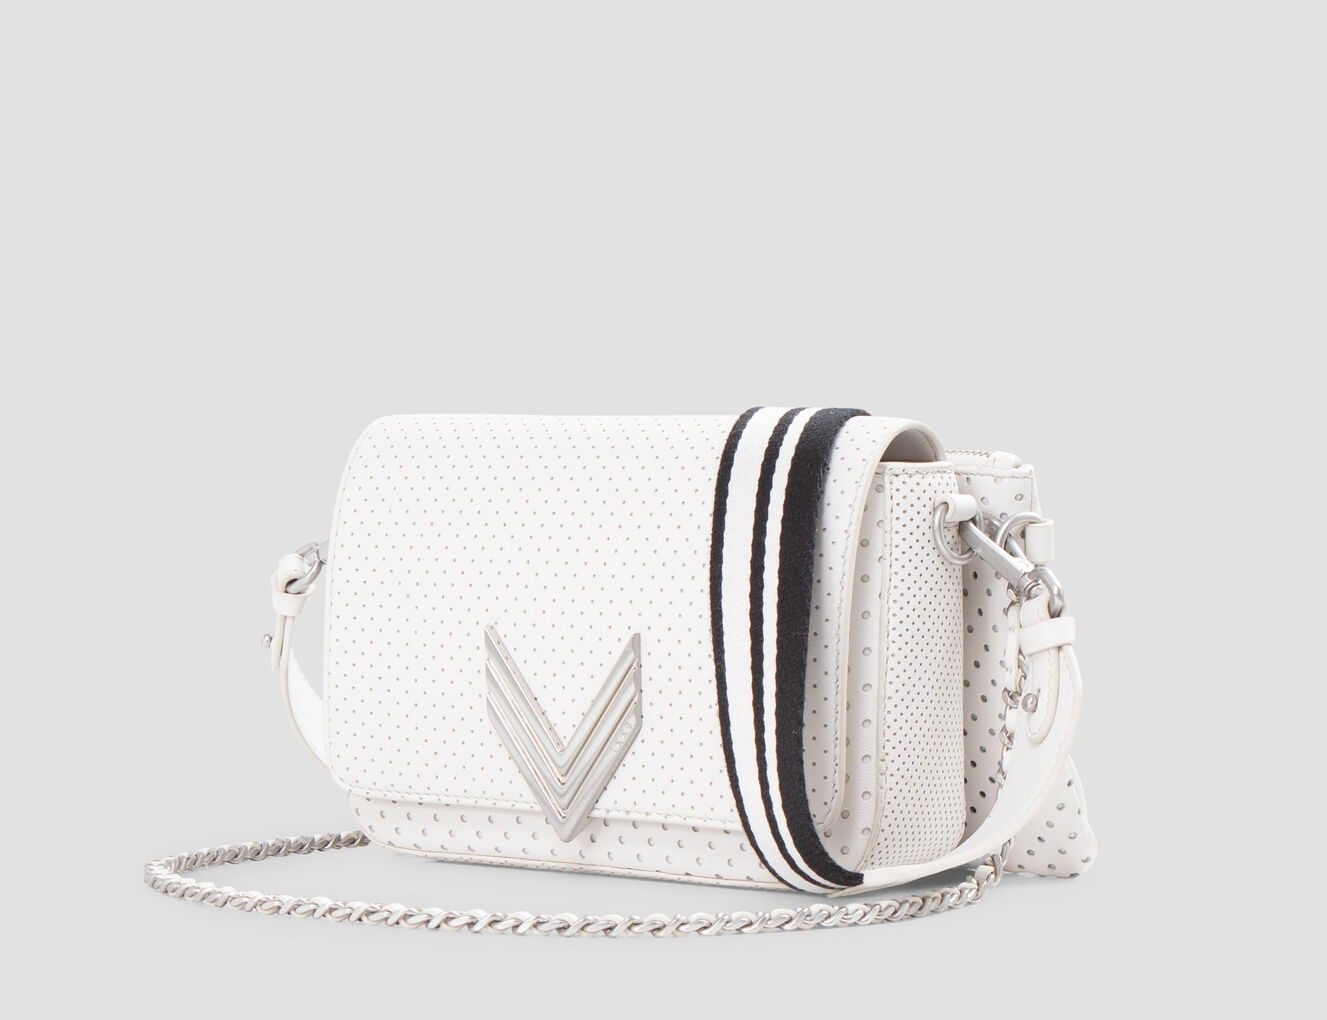 The 111 KINGSTON Women's white perforated leather bag - IKKS-6